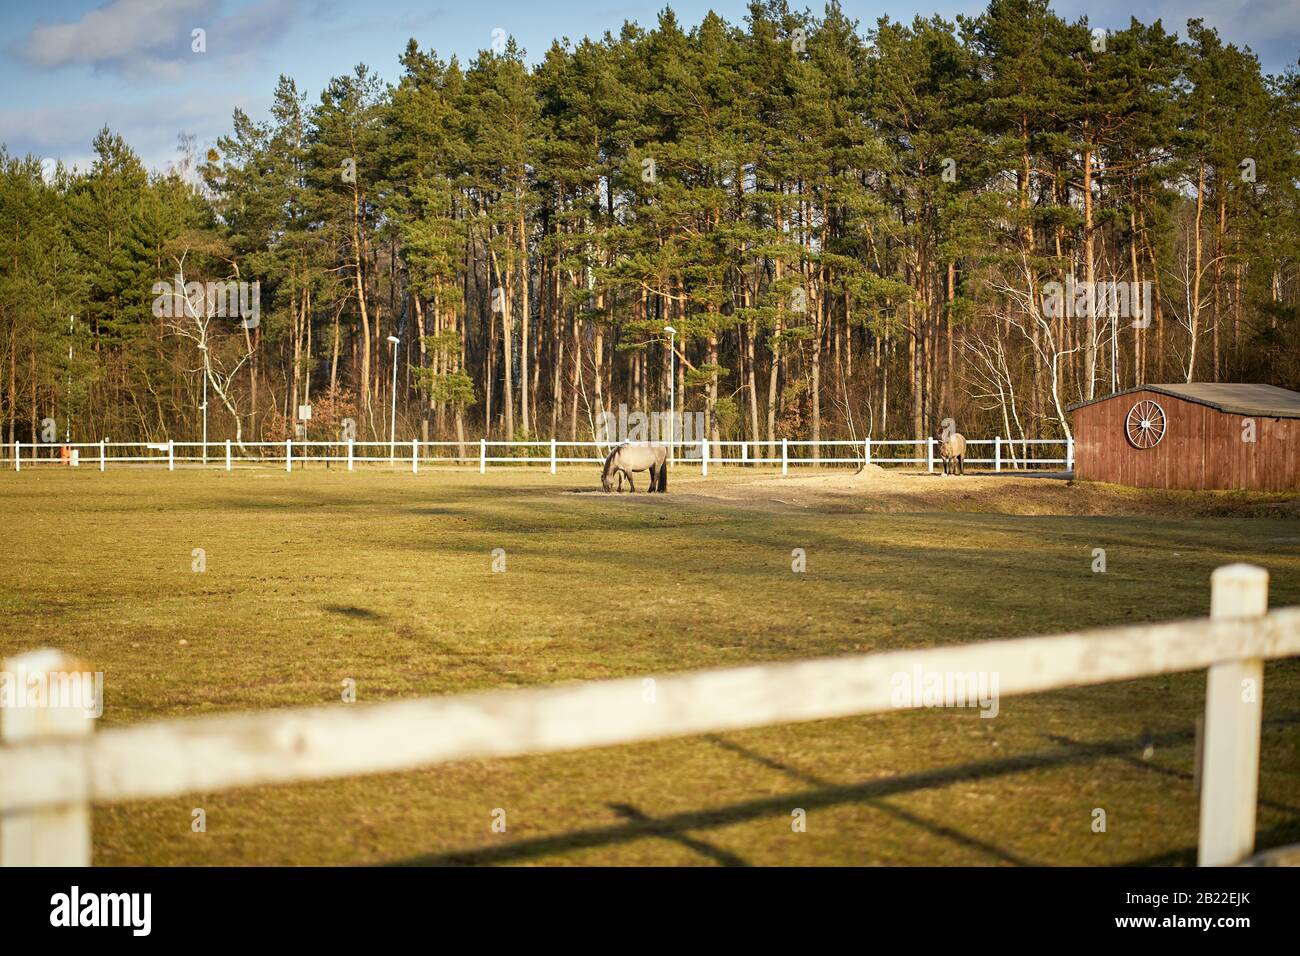 Beautiful sunny view of horses on paddock with forest Stock Photo